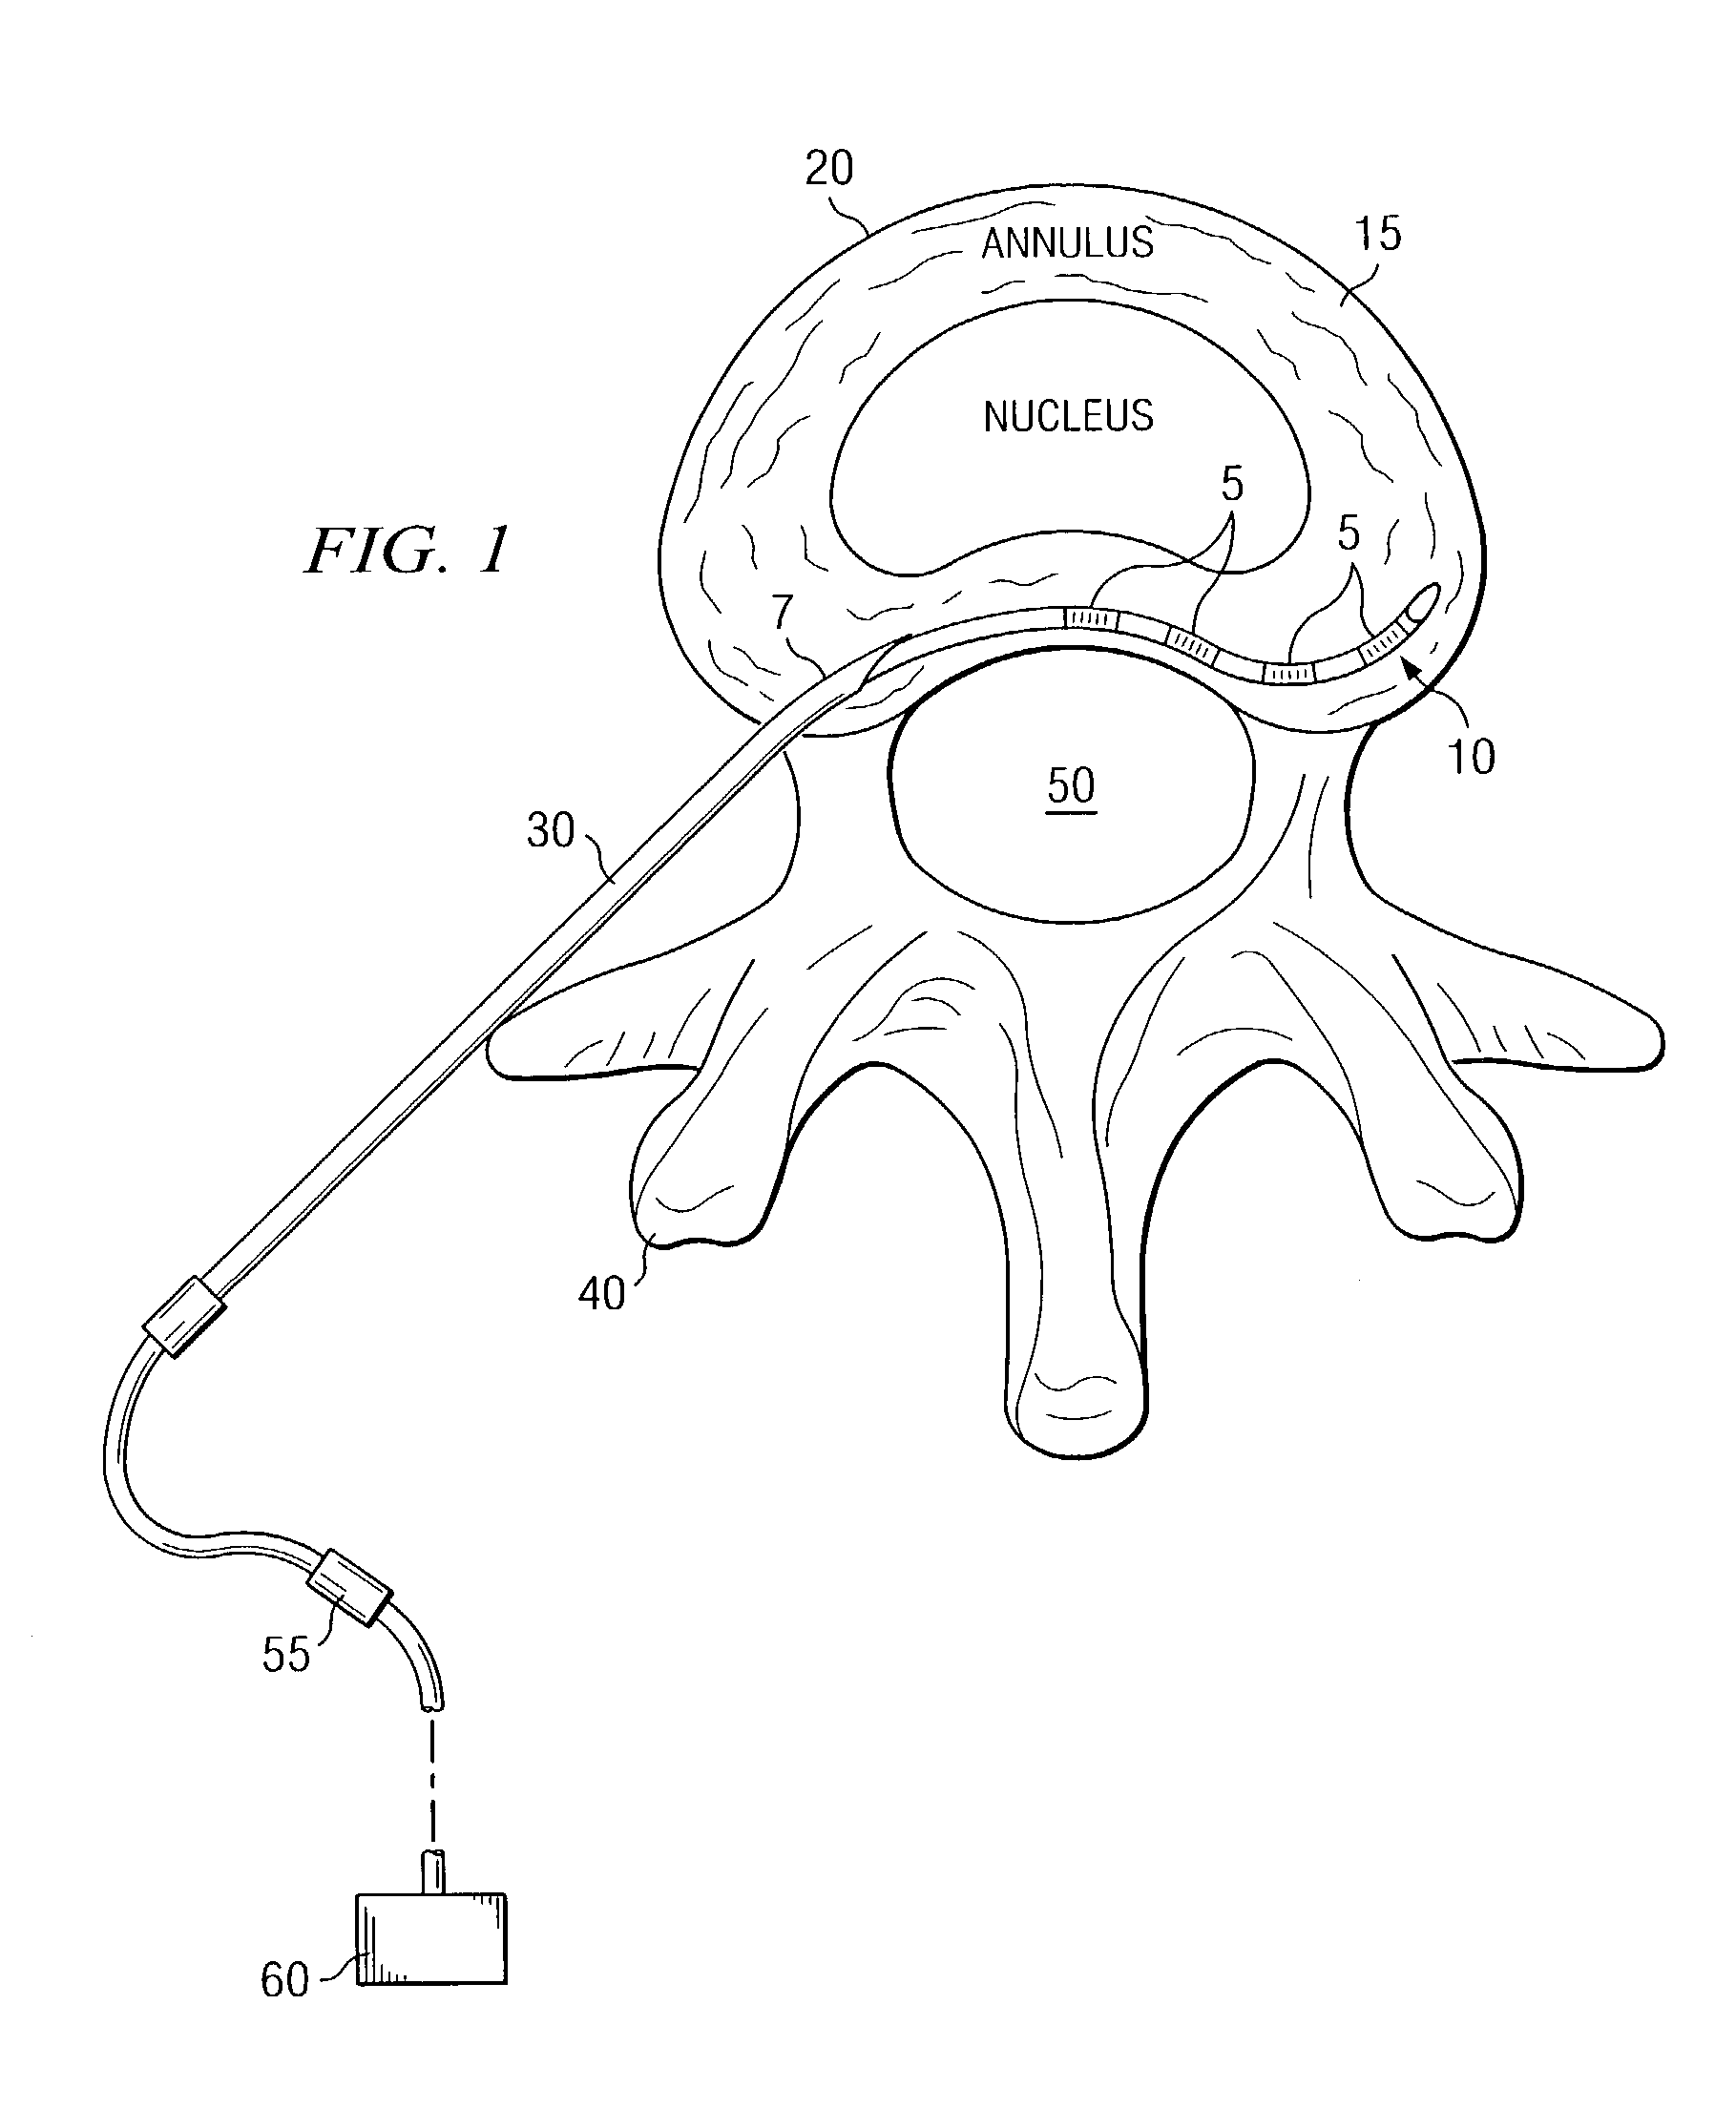 System and method for electrical stimulation of the intervertebral disc